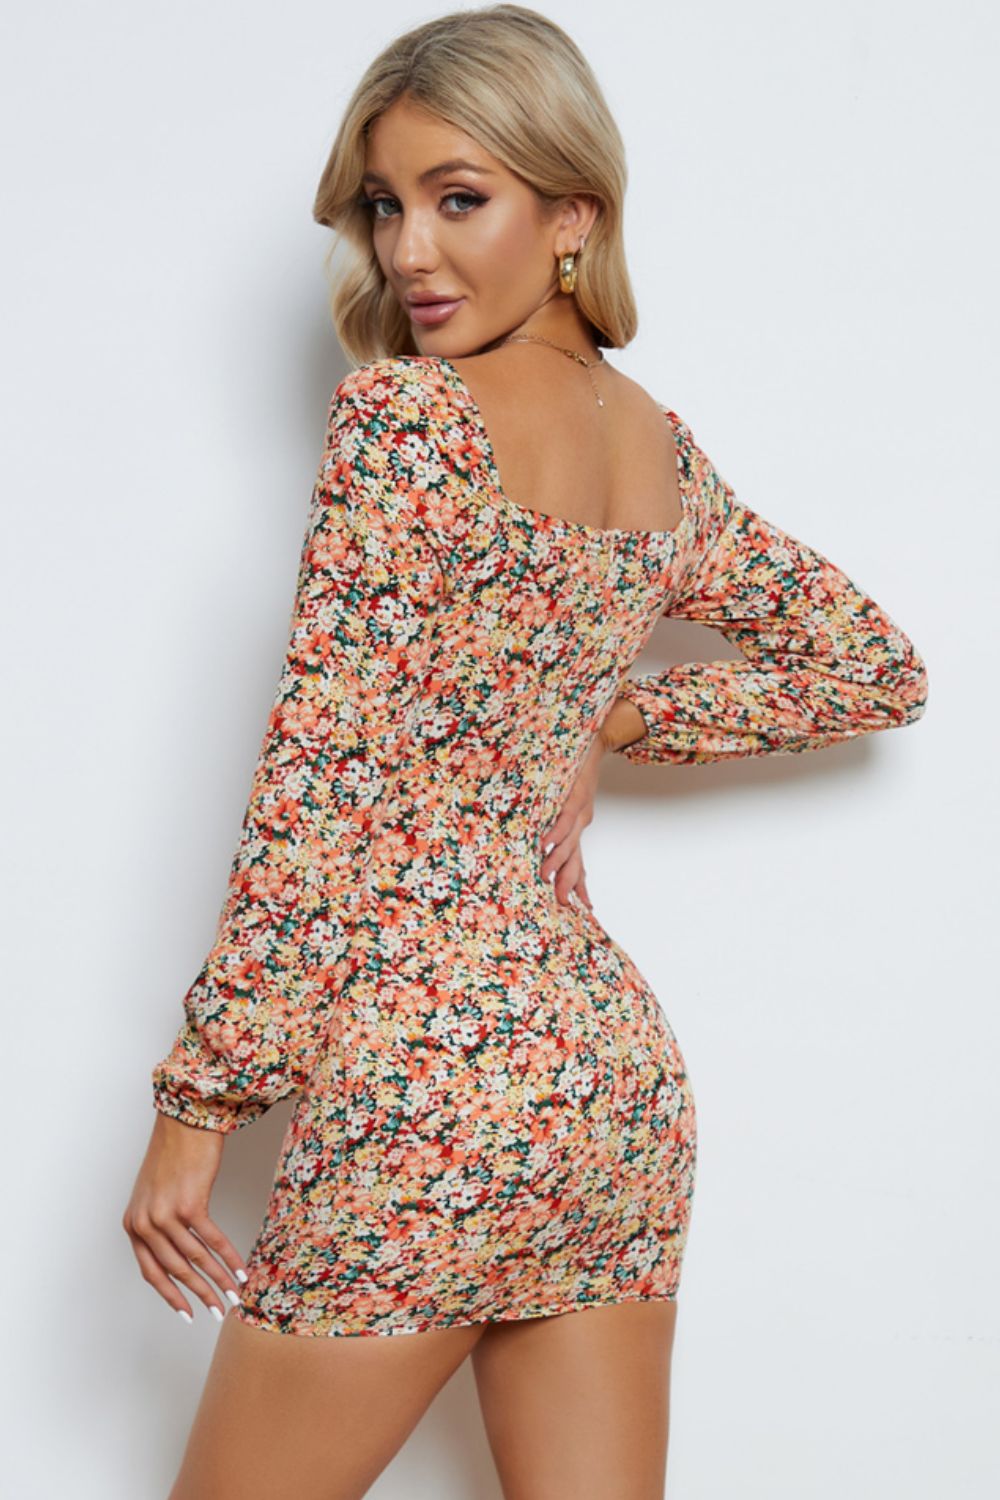 Elegant Floral Bodycon Dress: Perfect for Summer, Beach, or Wedding Guests!